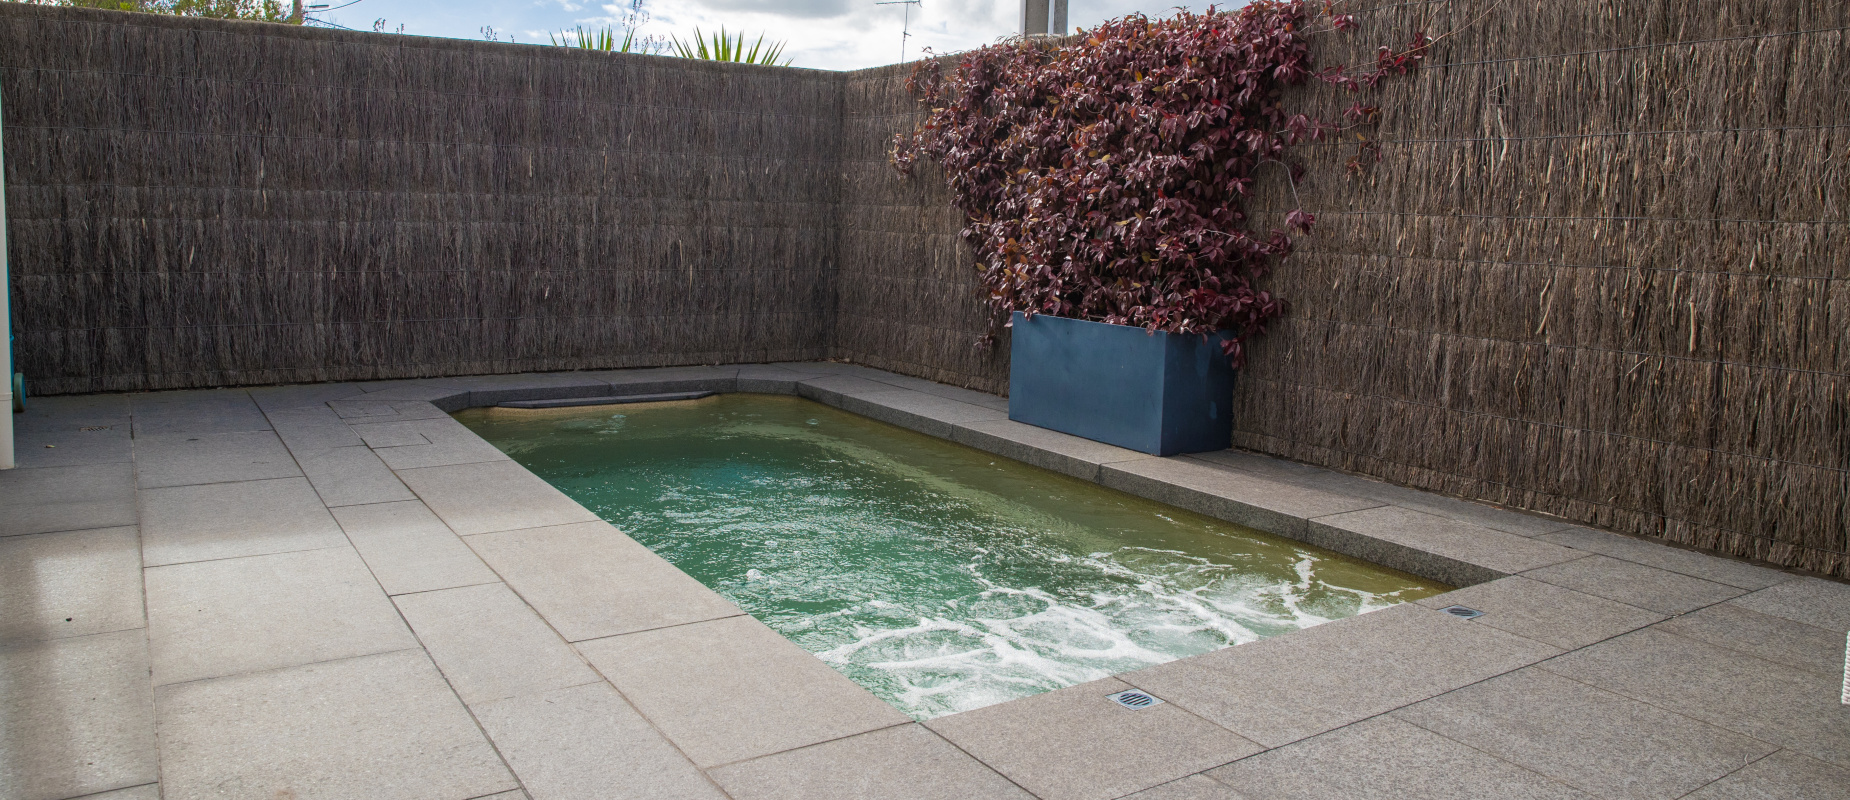 Compass-Pools-Australia_Plunge-Courtyard_Small-pool-with-tiled-around